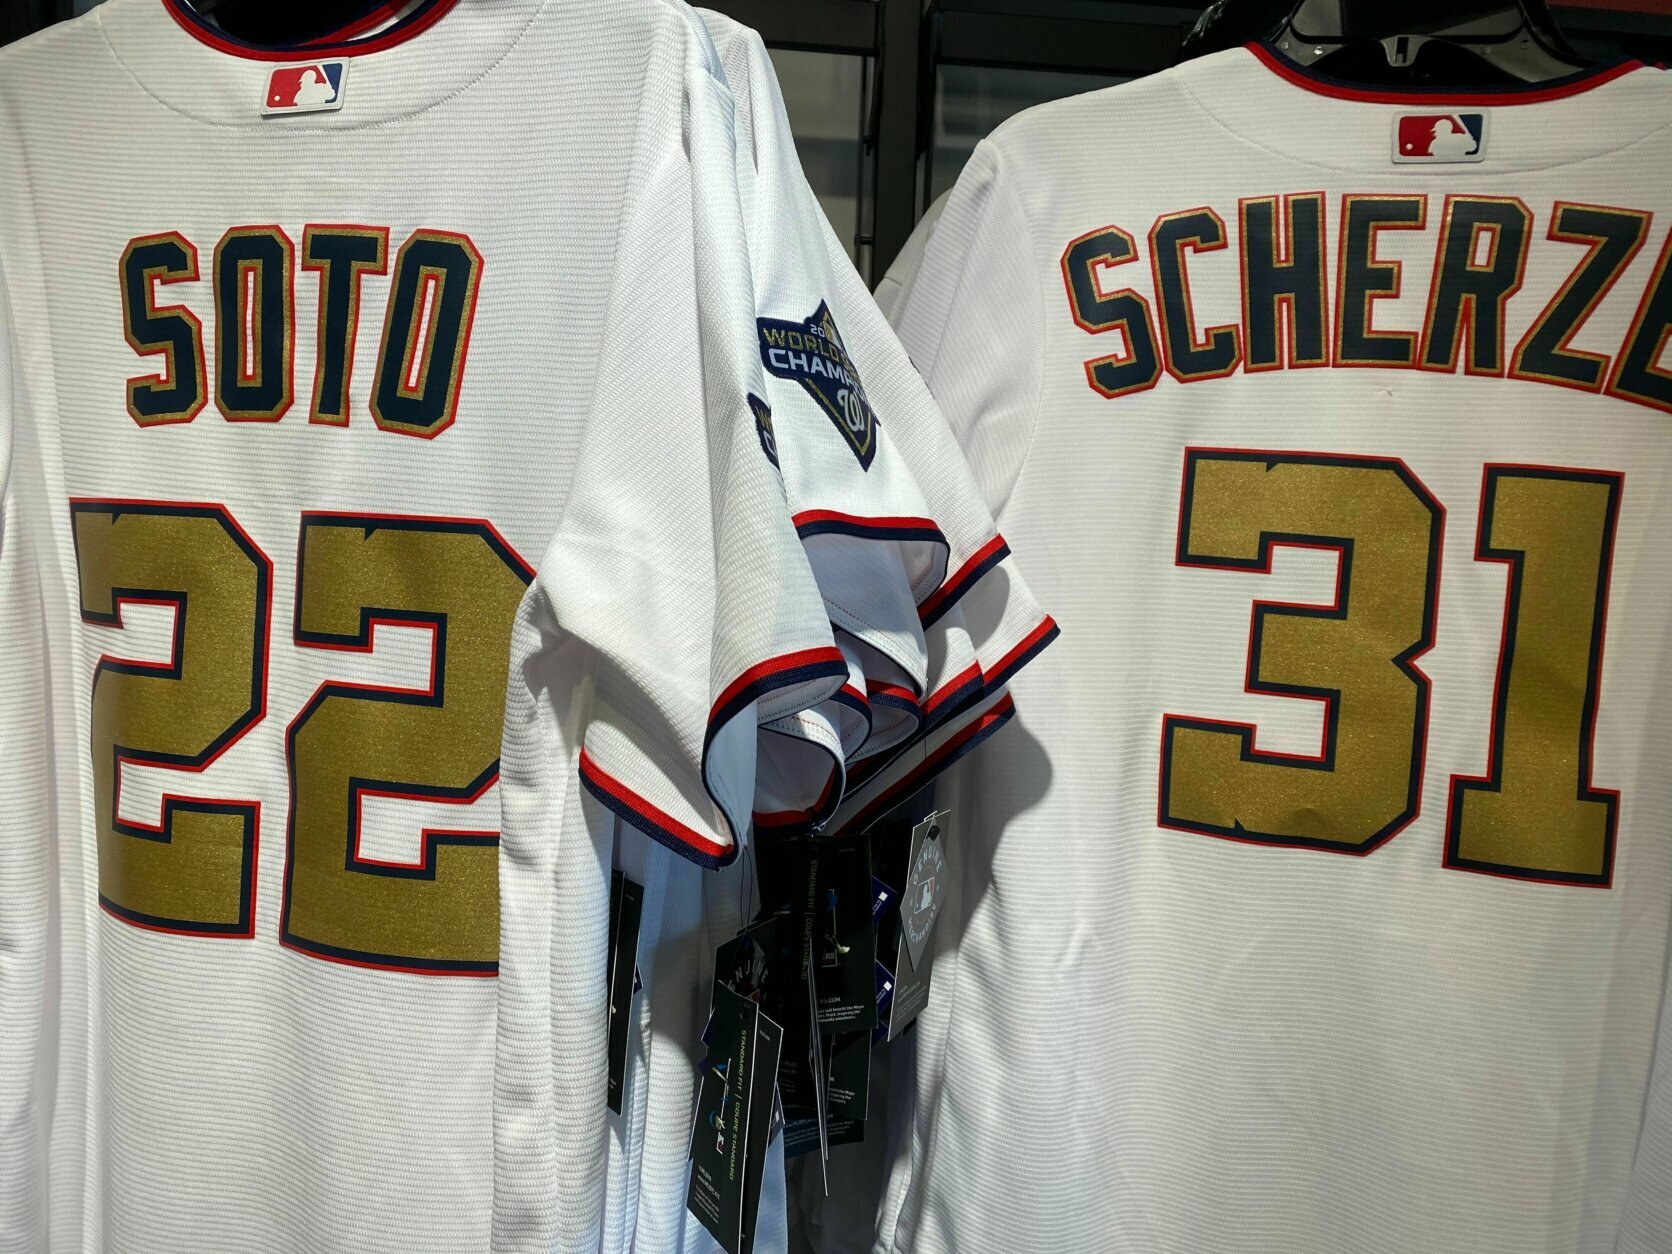 Why the Nationals are wearing gold-trimmed jerseys - The